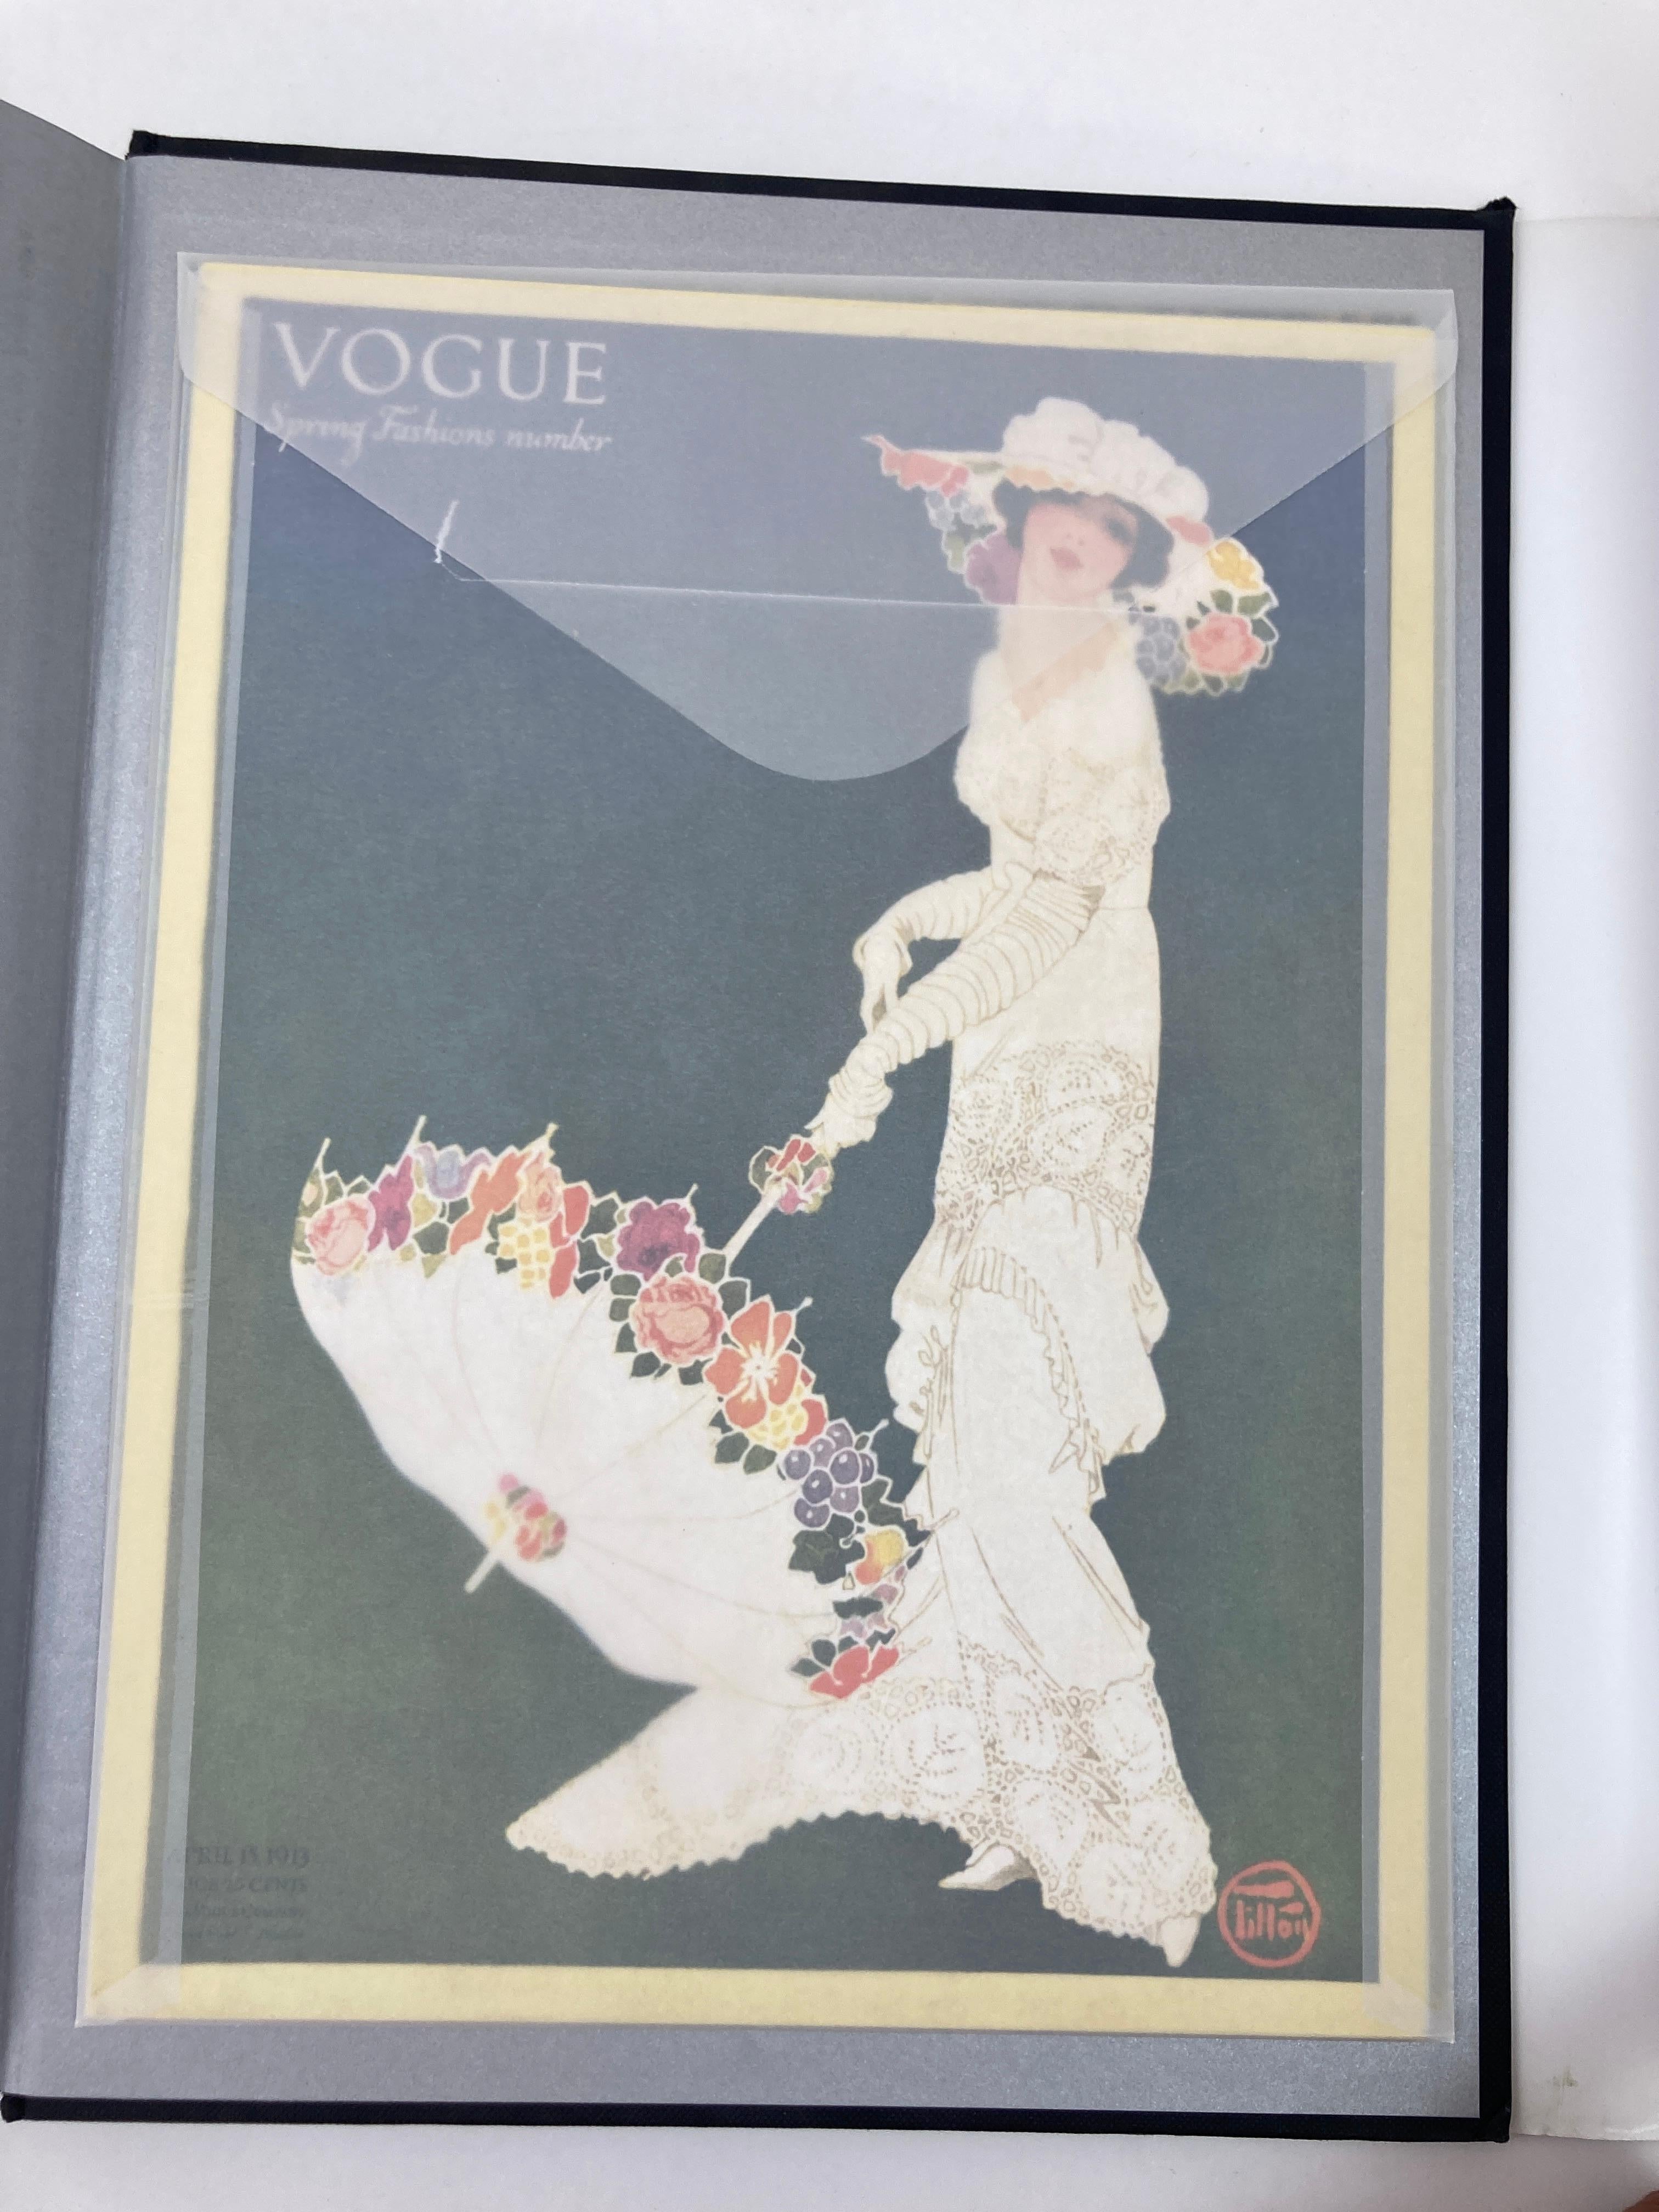 Vogue The Covers, Hardcover-Couchtischbuch im Angebot 15